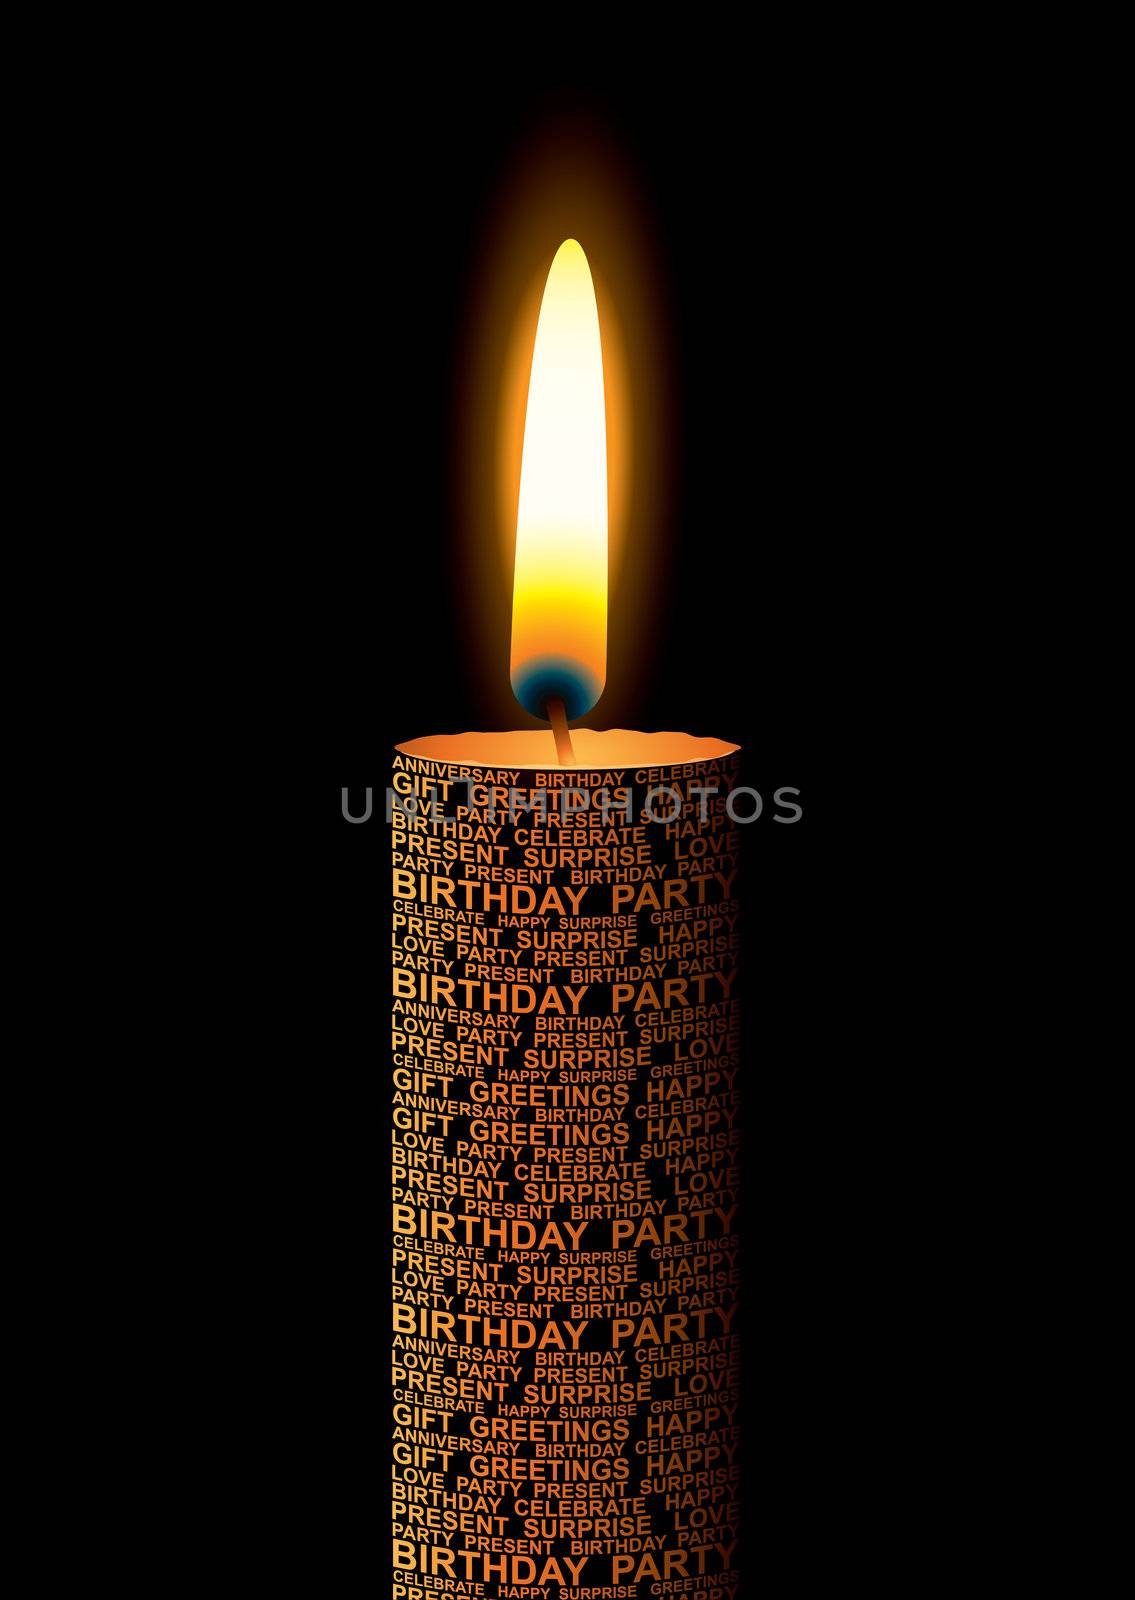 Orange birthday candle with text and bright flame